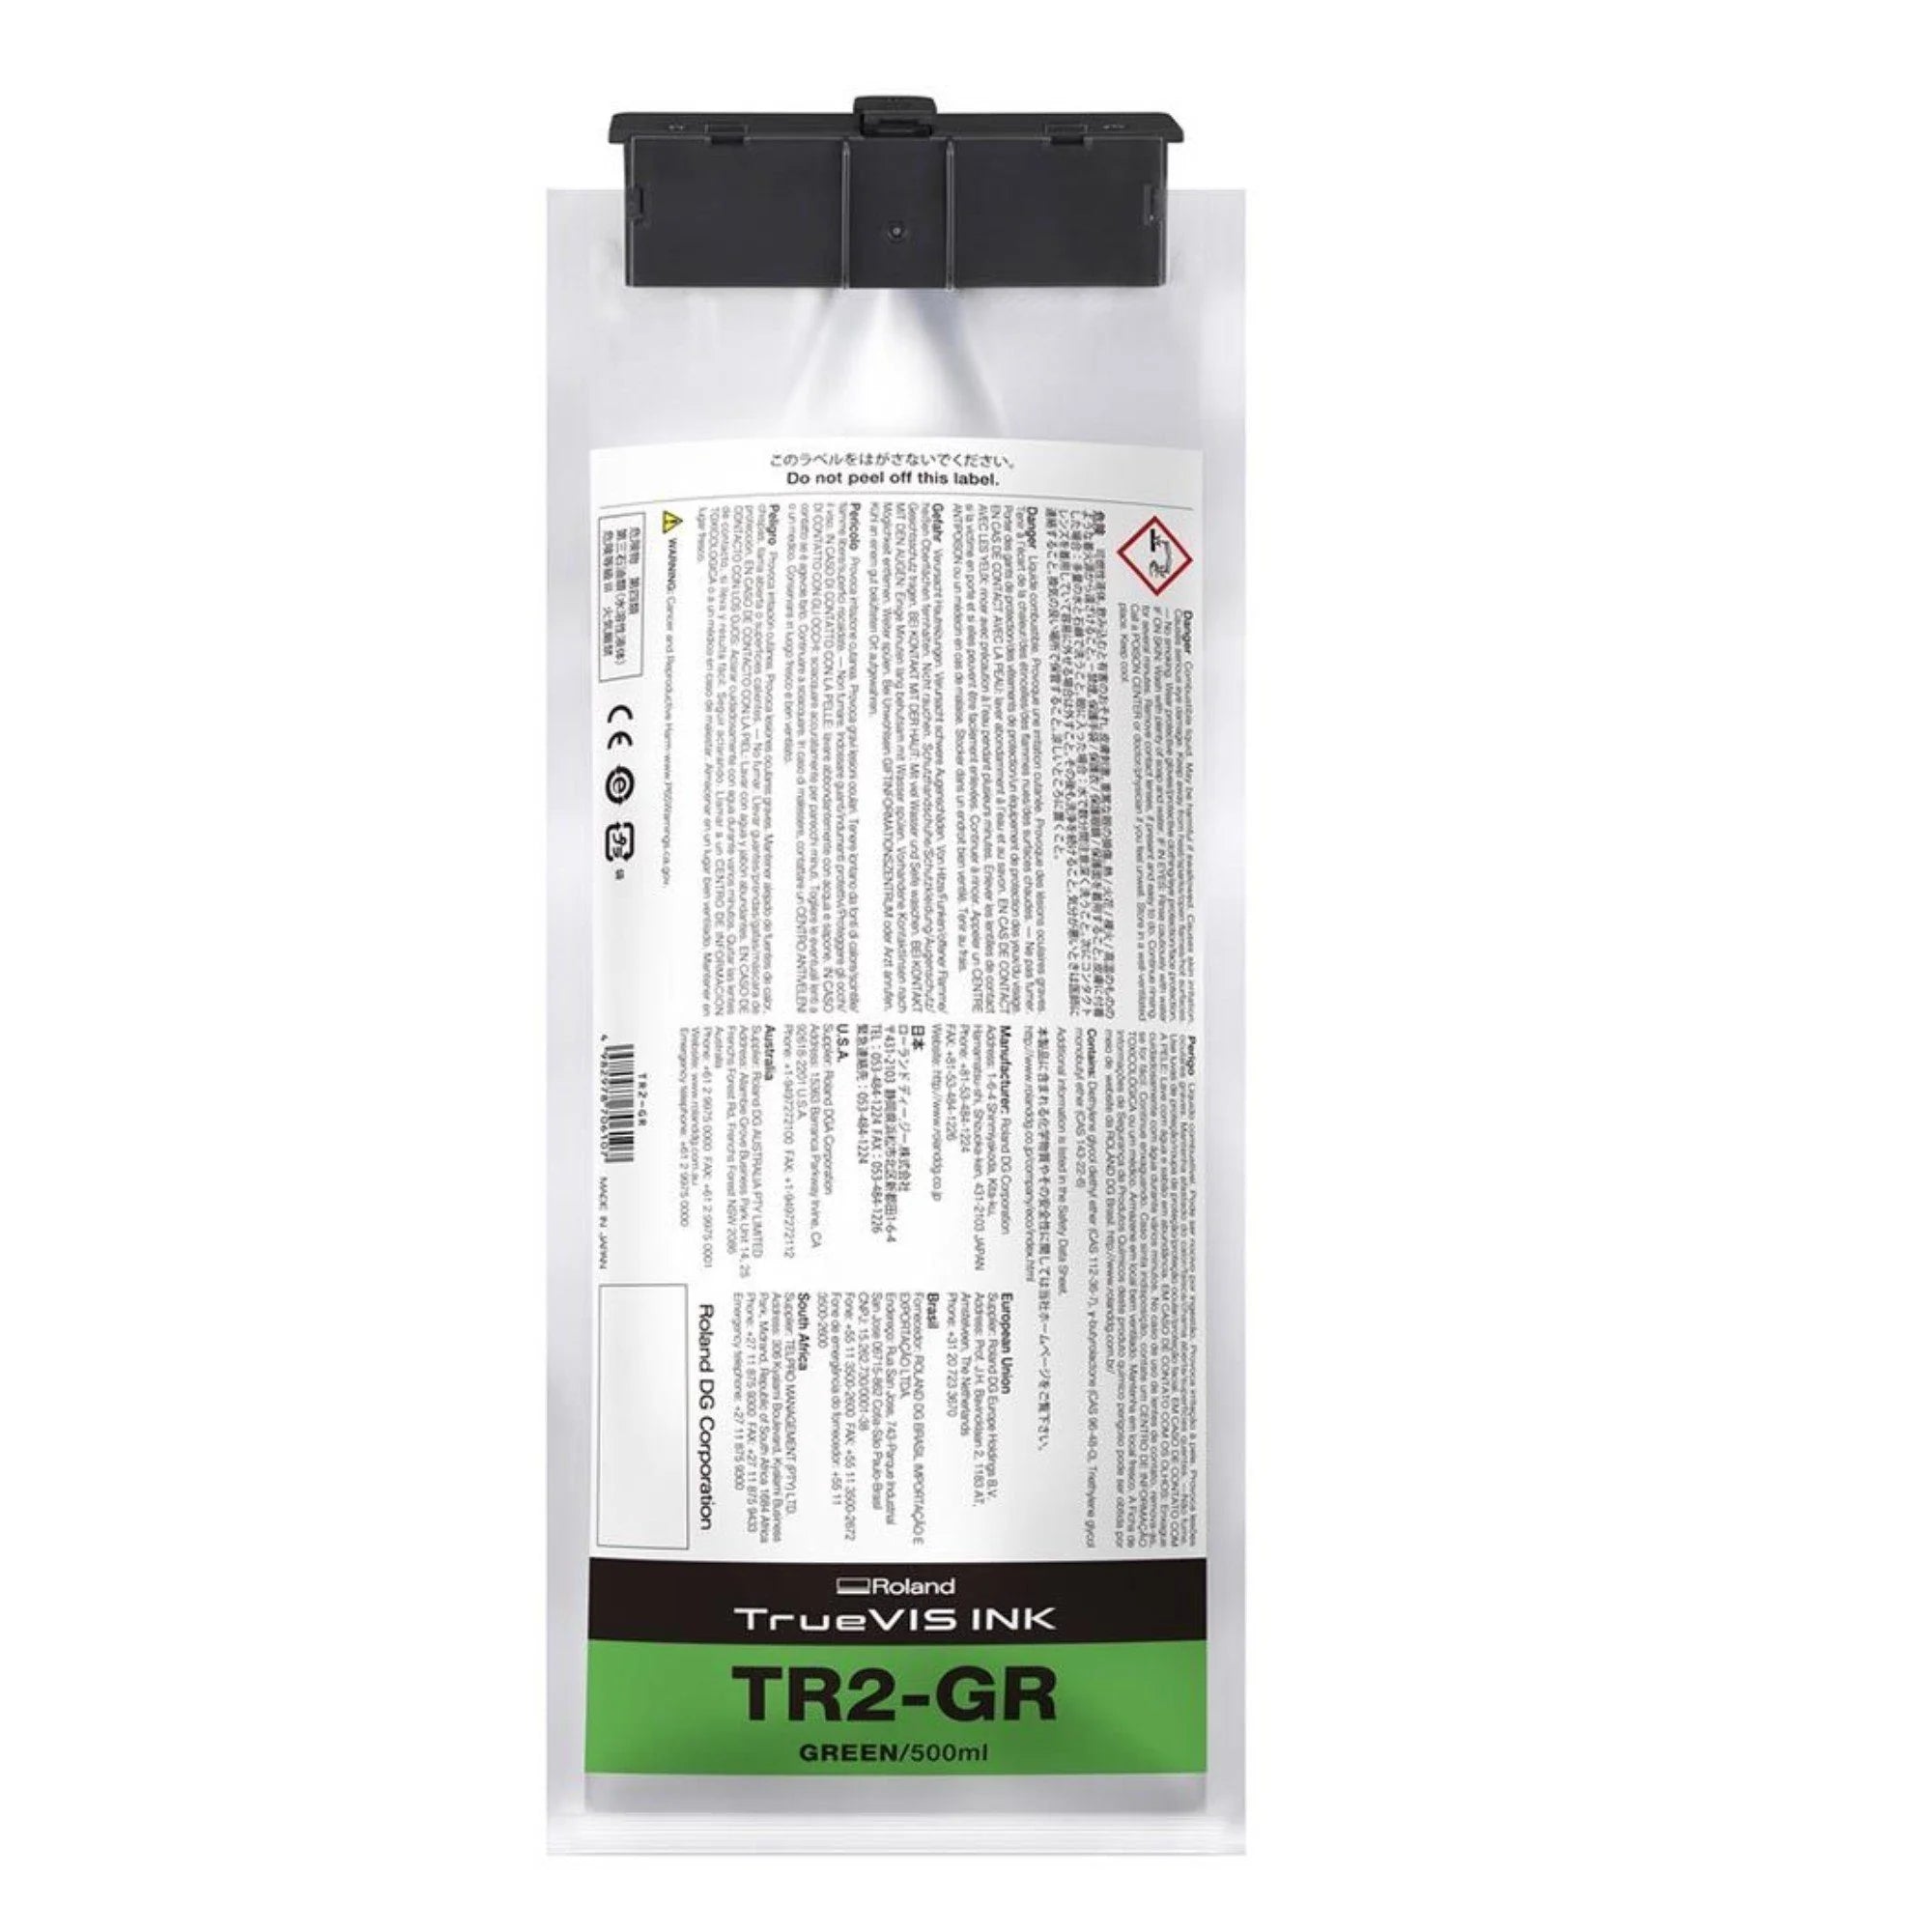 Roland TrueVIS TR2 Ink Colors 500ml Pouch